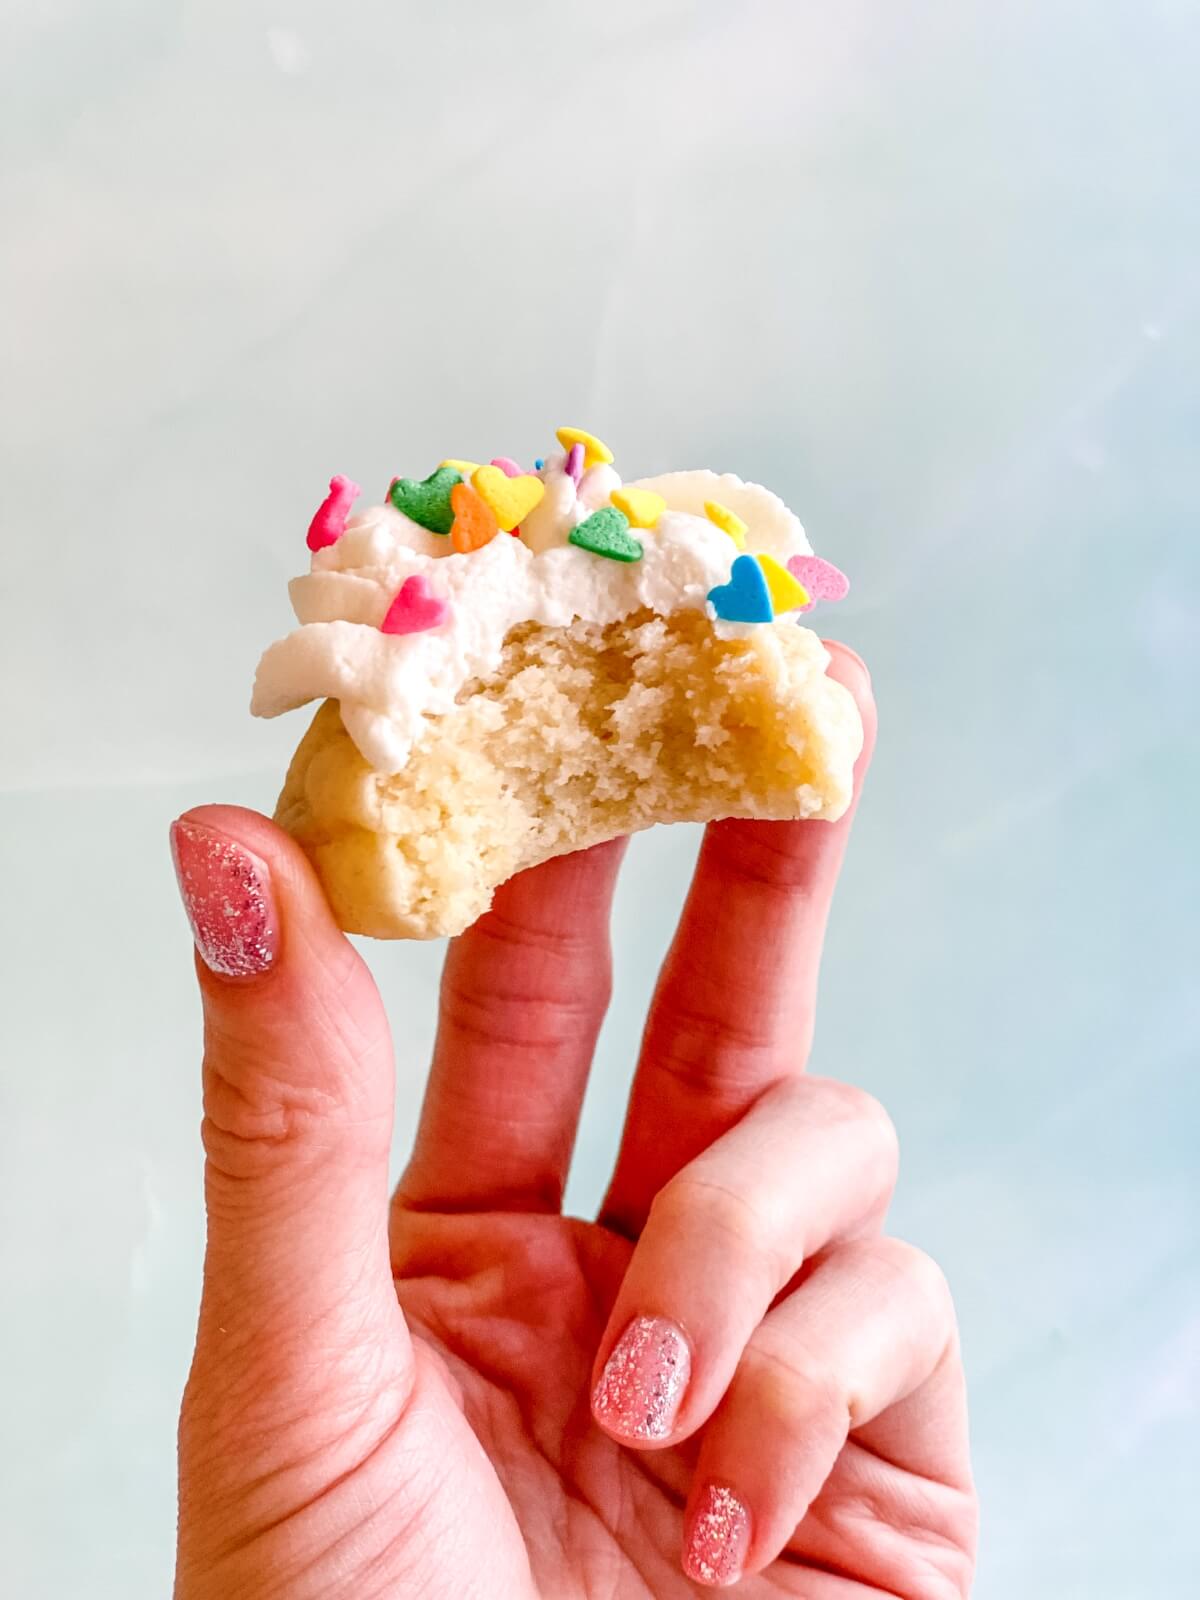 A hand holding a mini frosted sugar cookie with a bite taken out, showing the soft center